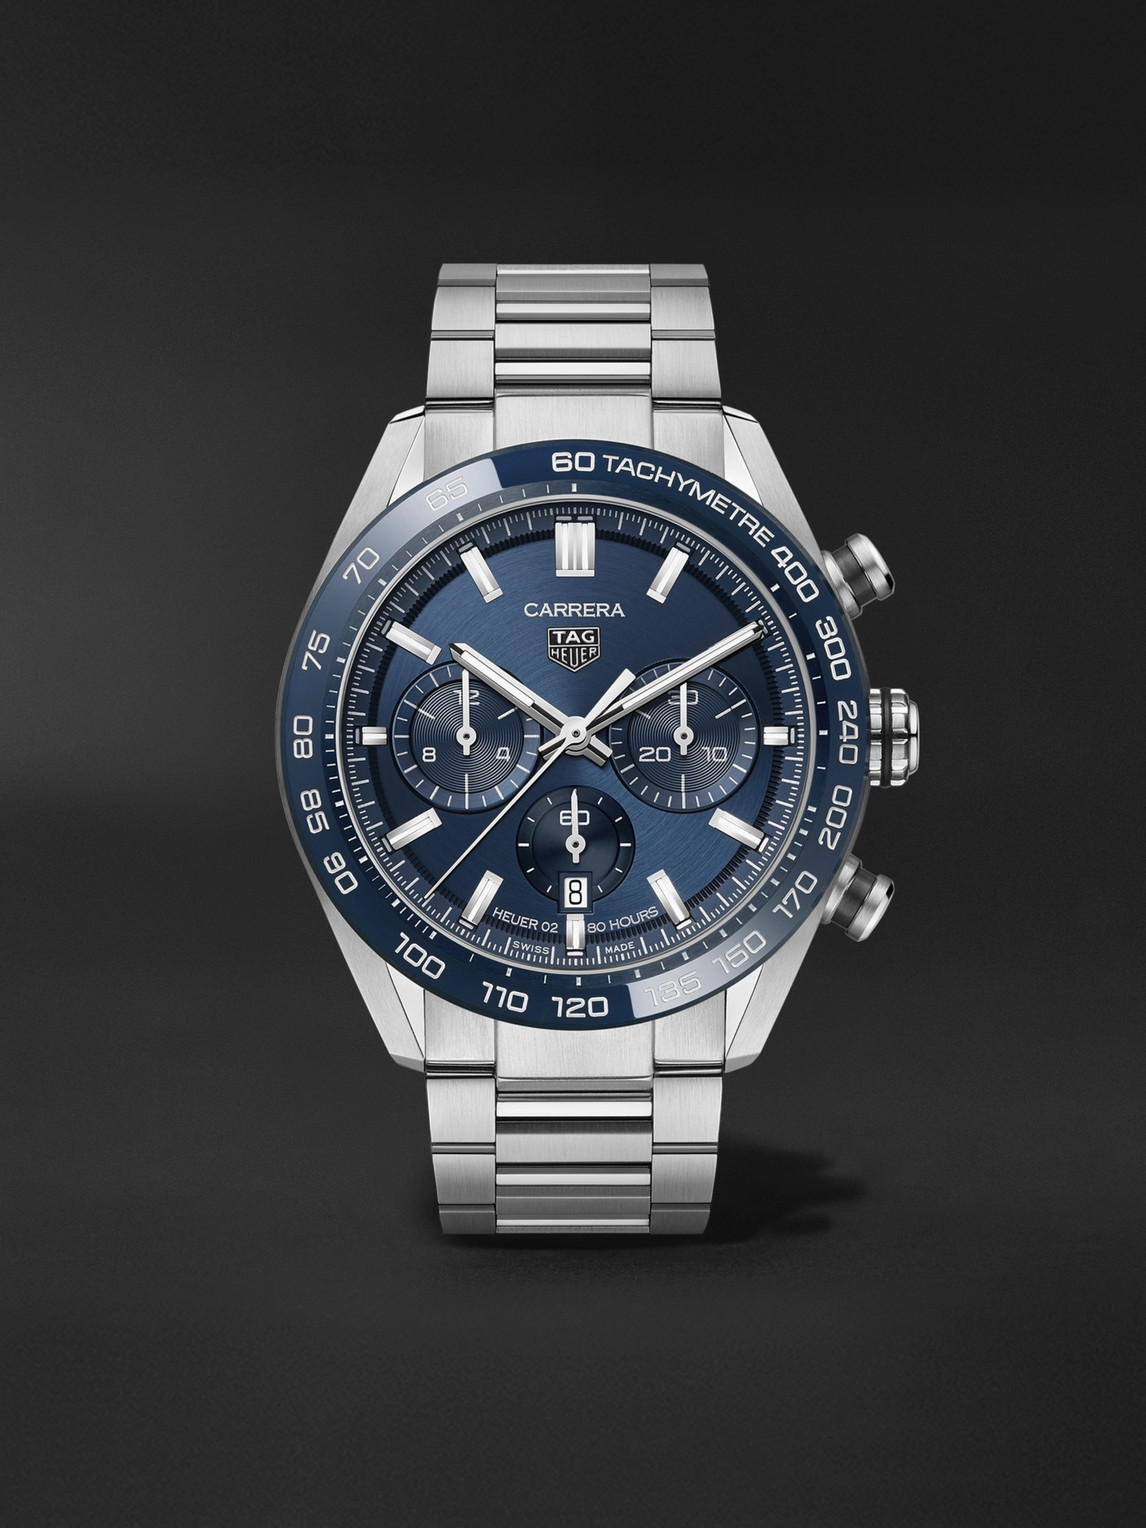 Tag Heuer Carrera Automatic Chronograph 44mm Stainless Steel Watch, Ref. No. Cbn2a1a.ba643 In Blue